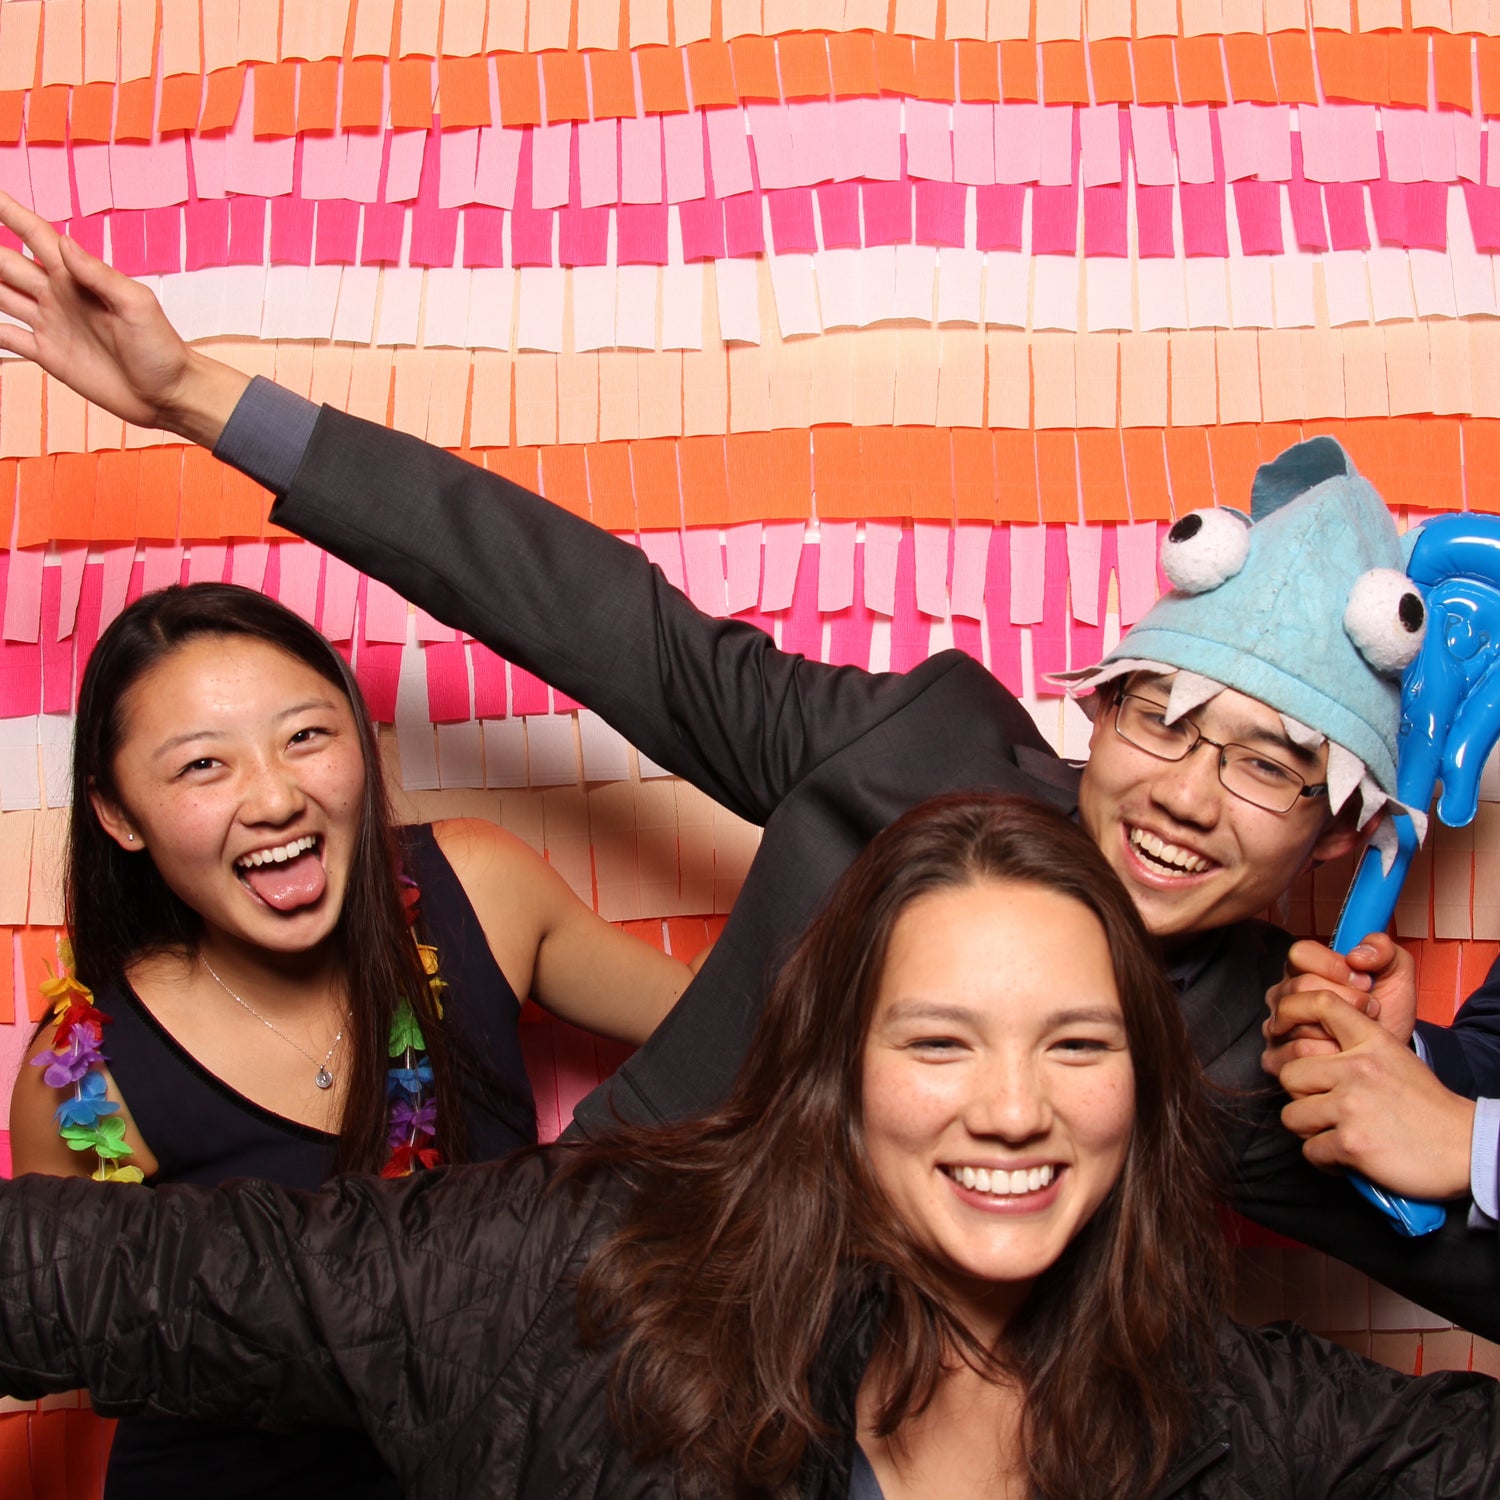 Wedding photo booth fun with props and a DIY paper backdrop